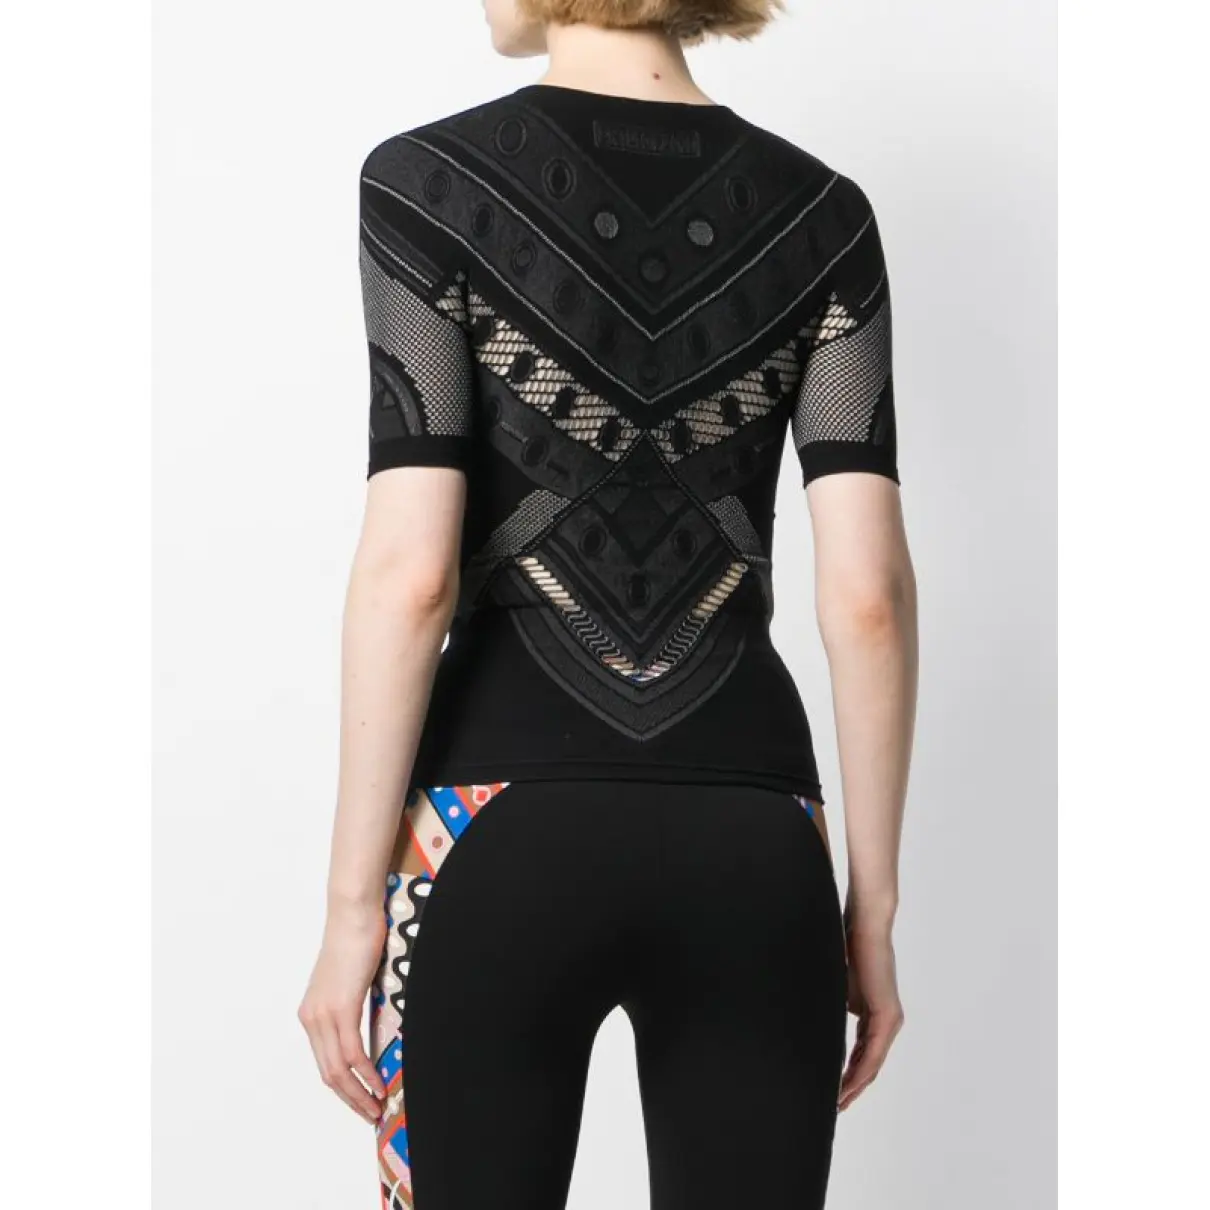 Buy Emilio Pucci Black Polyester Top online